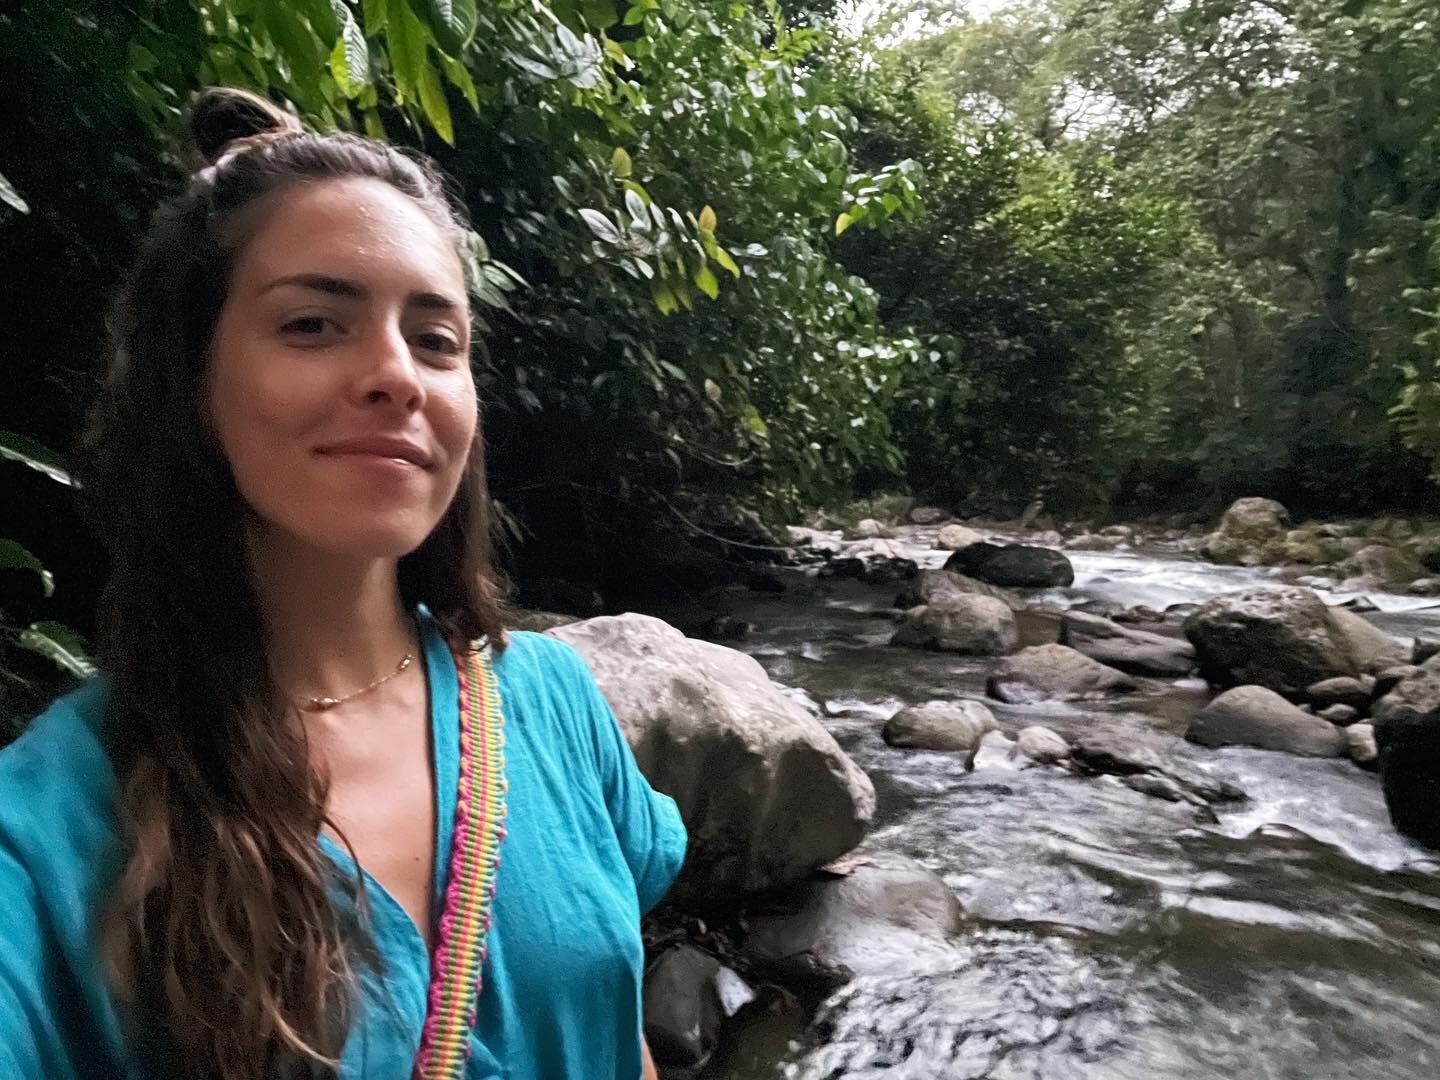 here is a picture of me in a peak moment of remembering who I truly am. a moment where the jungle rivers, warmed by a nearby volcano, and the birds that soared over head were straight out of a psychedelic vision. the color of their feathers brought t